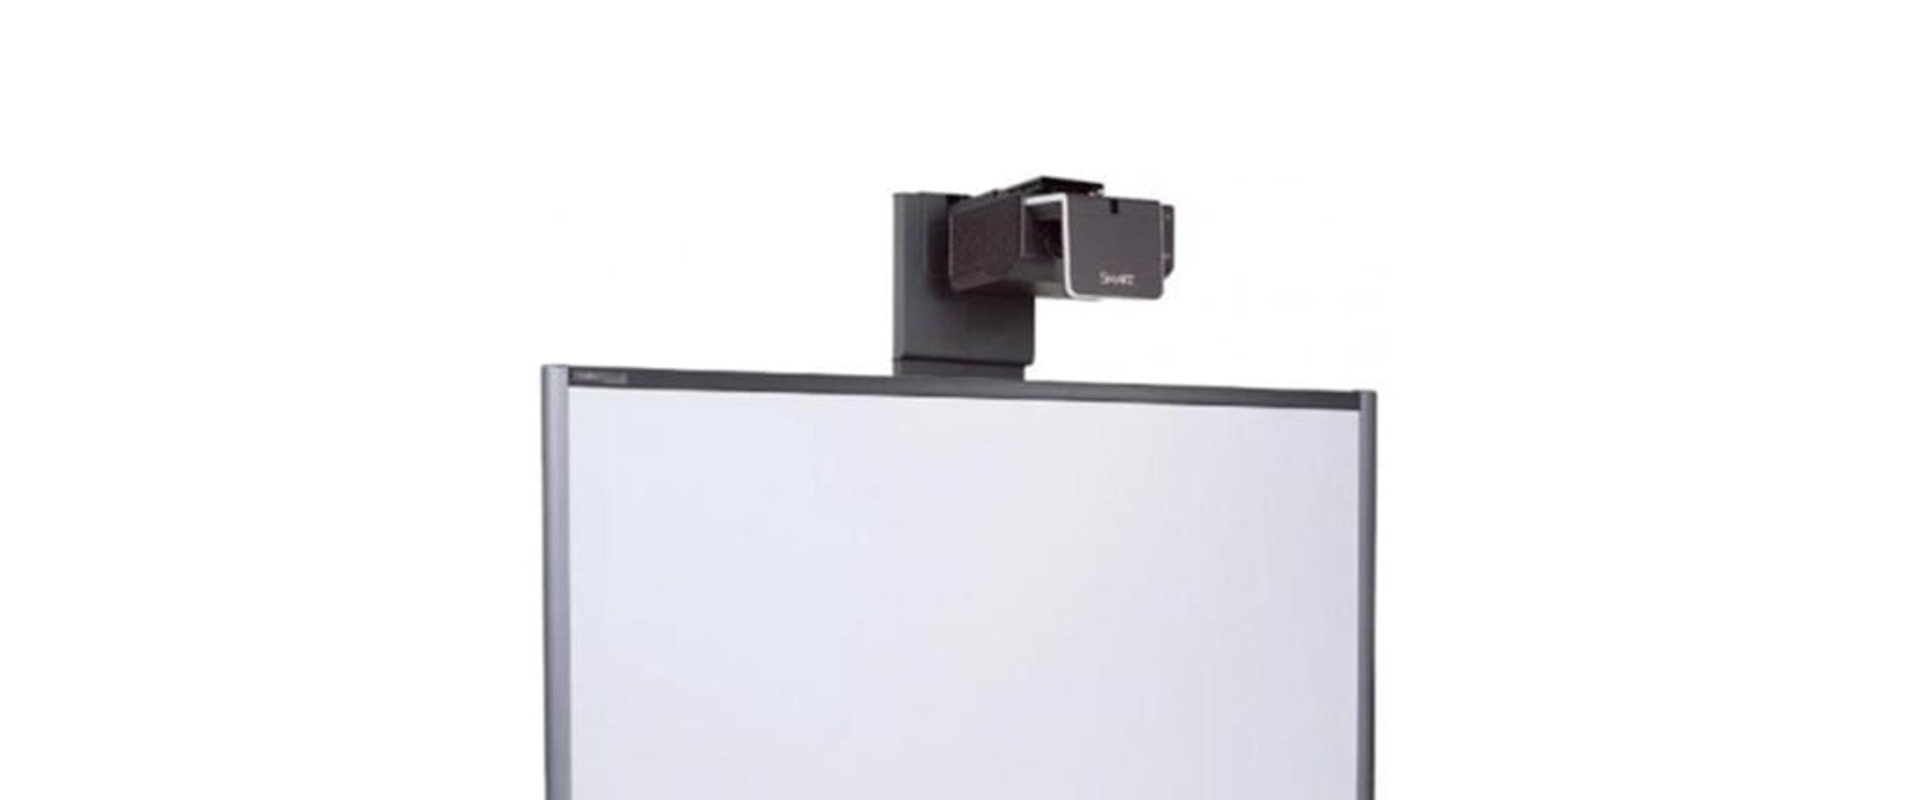 A Comprehensive Look at Interactive Whiteboards and Projectors for Effective Teaching